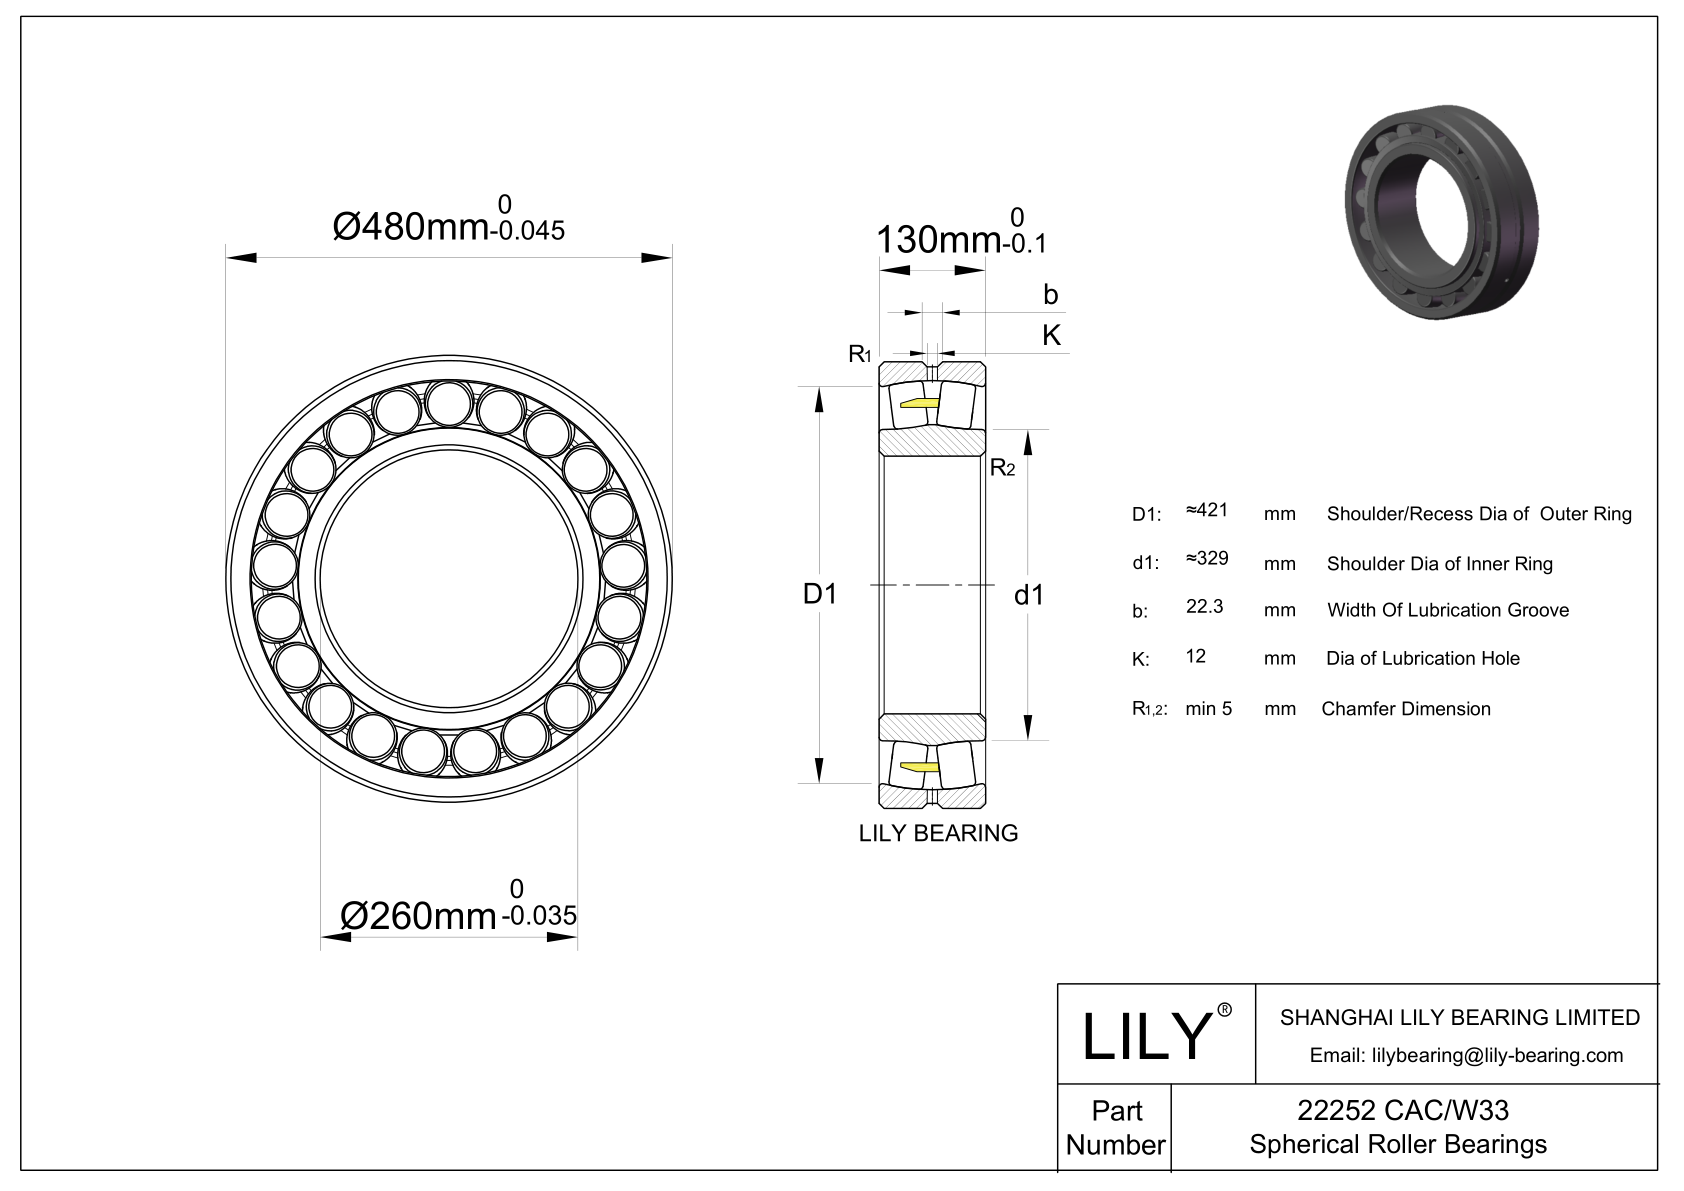 22252 CAC/W33 Double Row Spherical Roller Bearing cad drawing